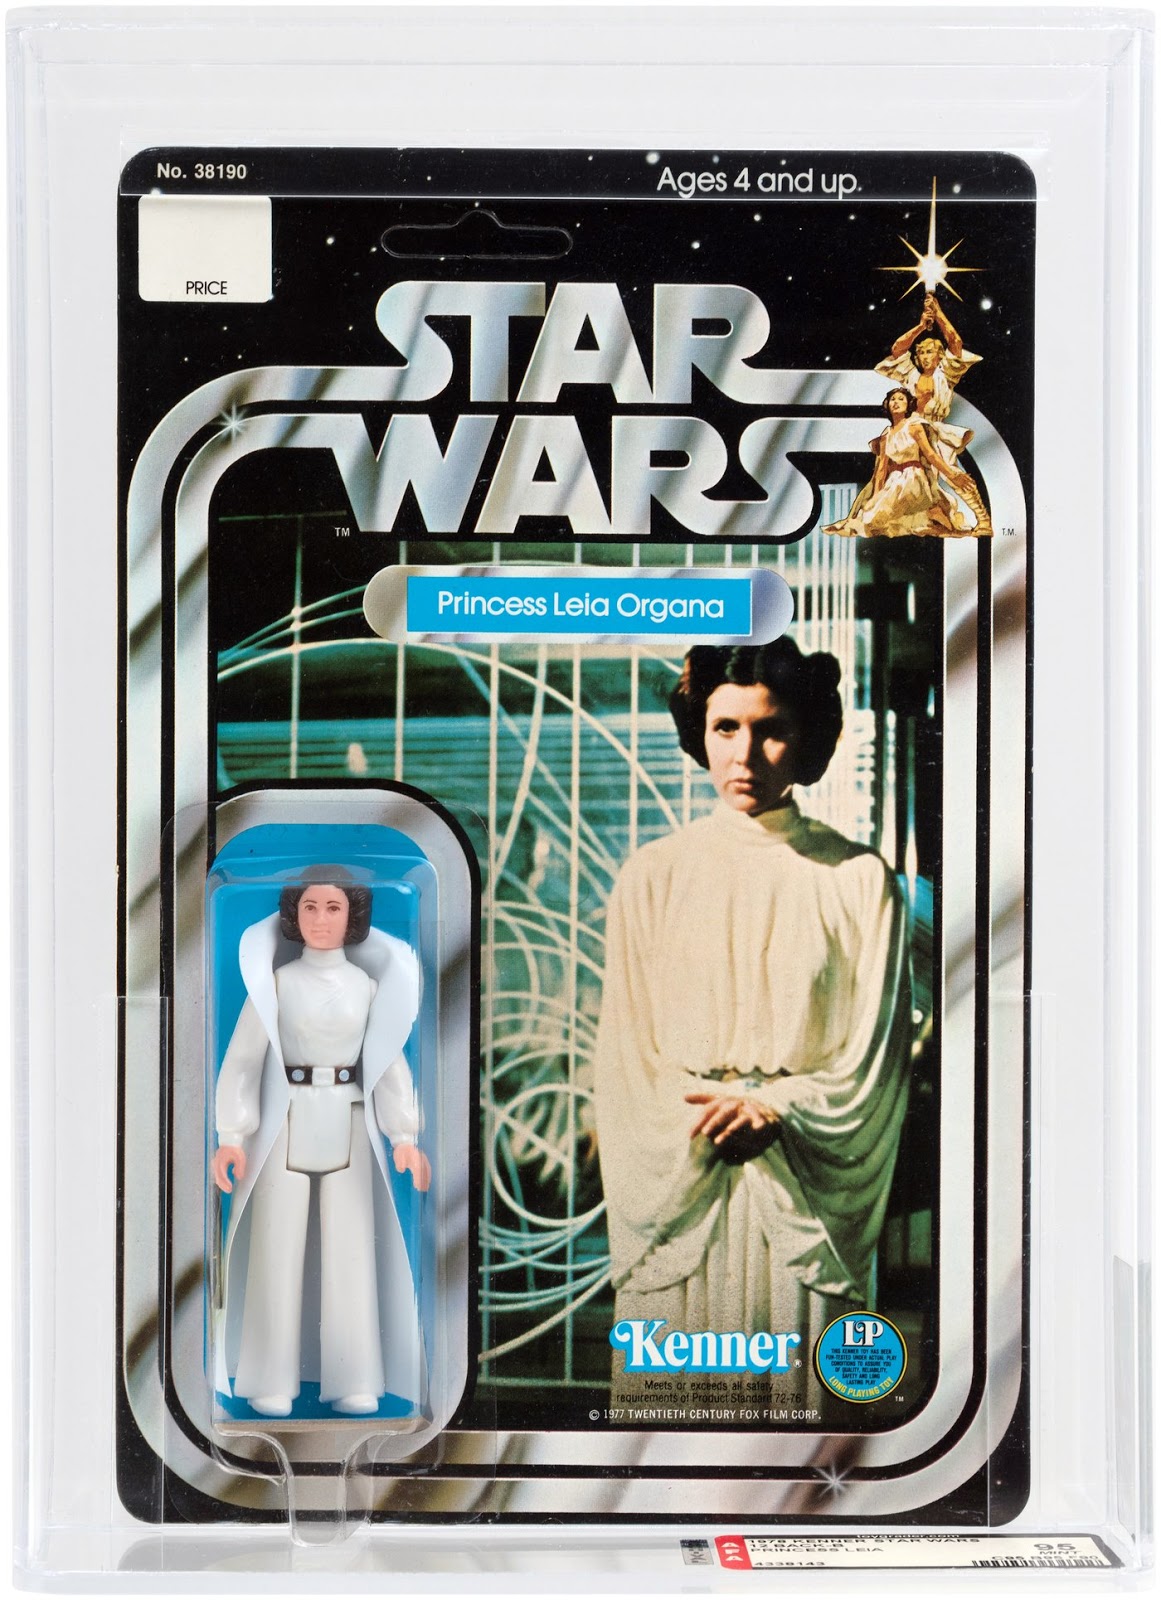 Tomart's Price Guide to Worldwide Star Wars Collectibles, 2nd Edition